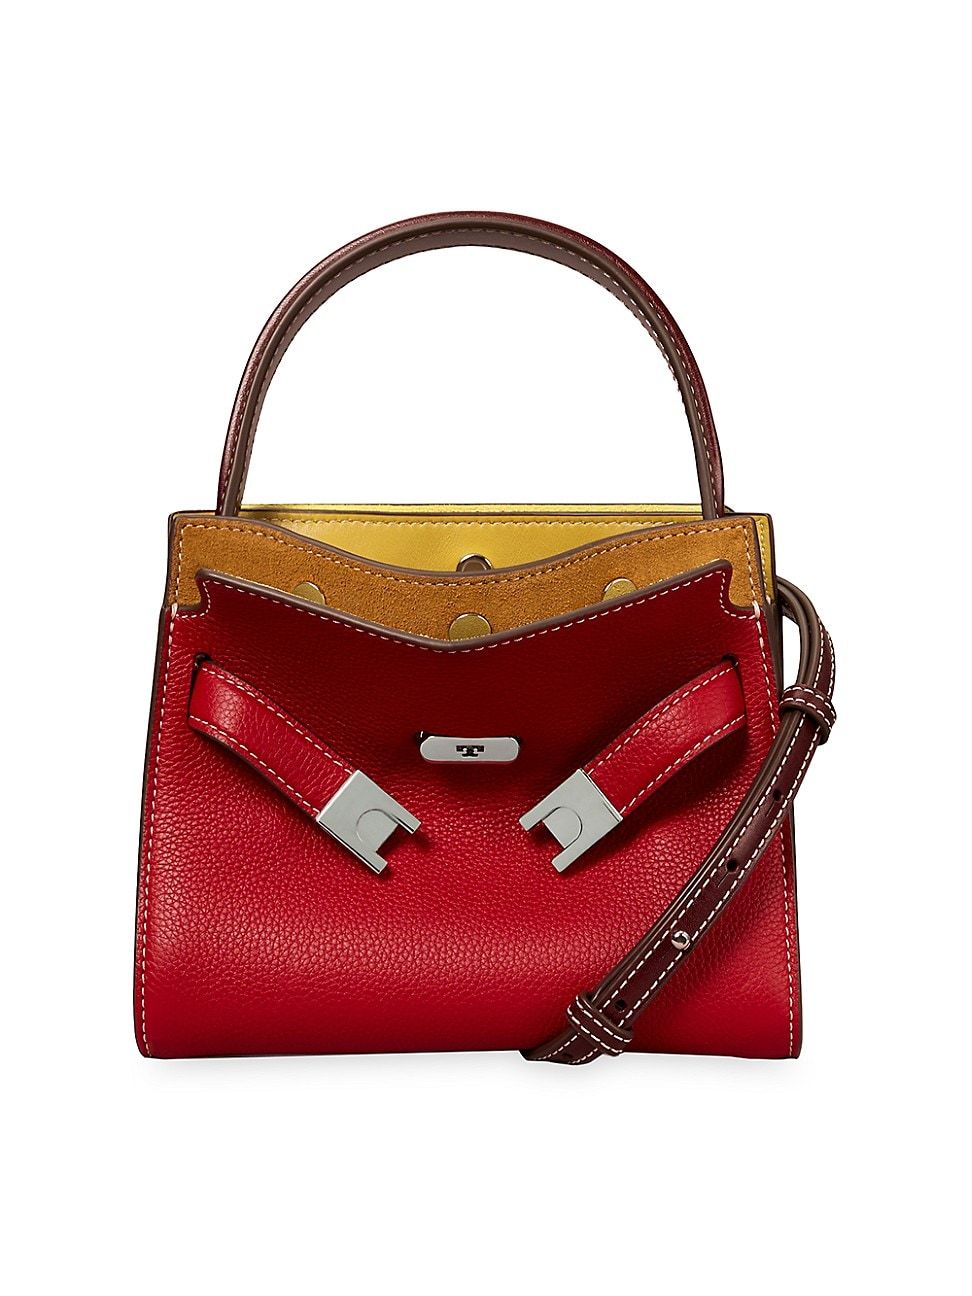 Trend to try: 5 candy-coloured bags for spring